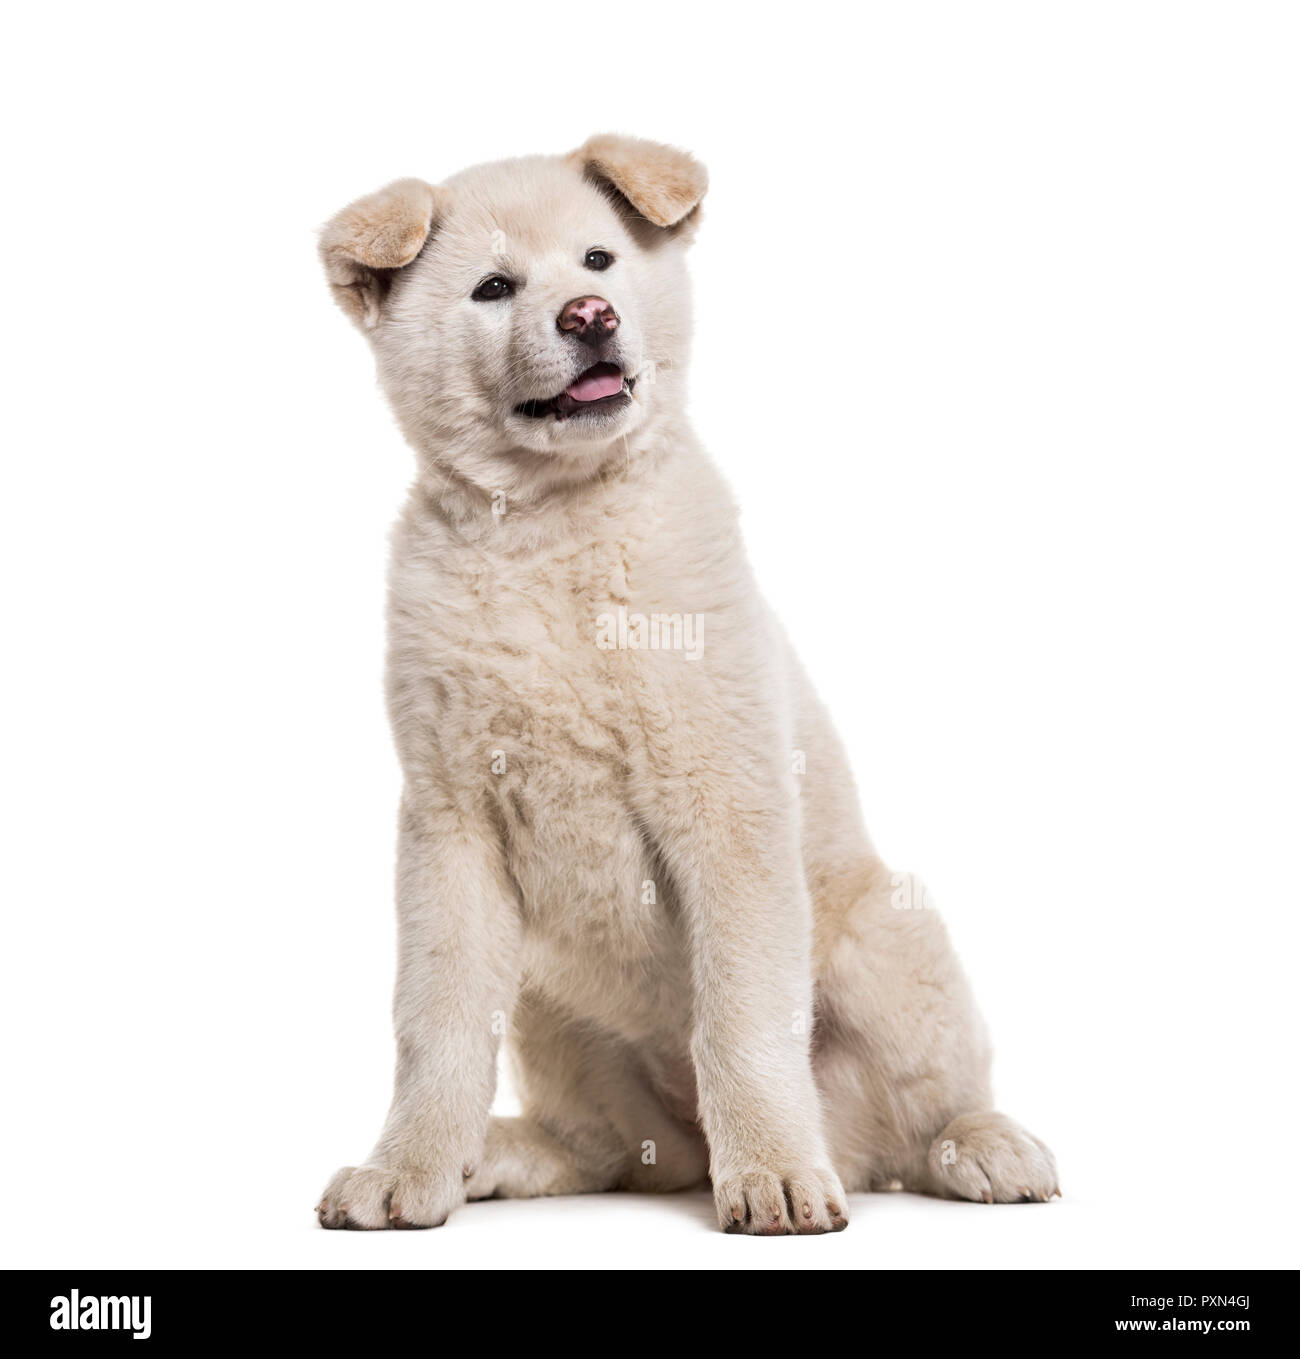 Akita Inu puppy, 2 months old, sitting against white background Stock Photo  - Alamy